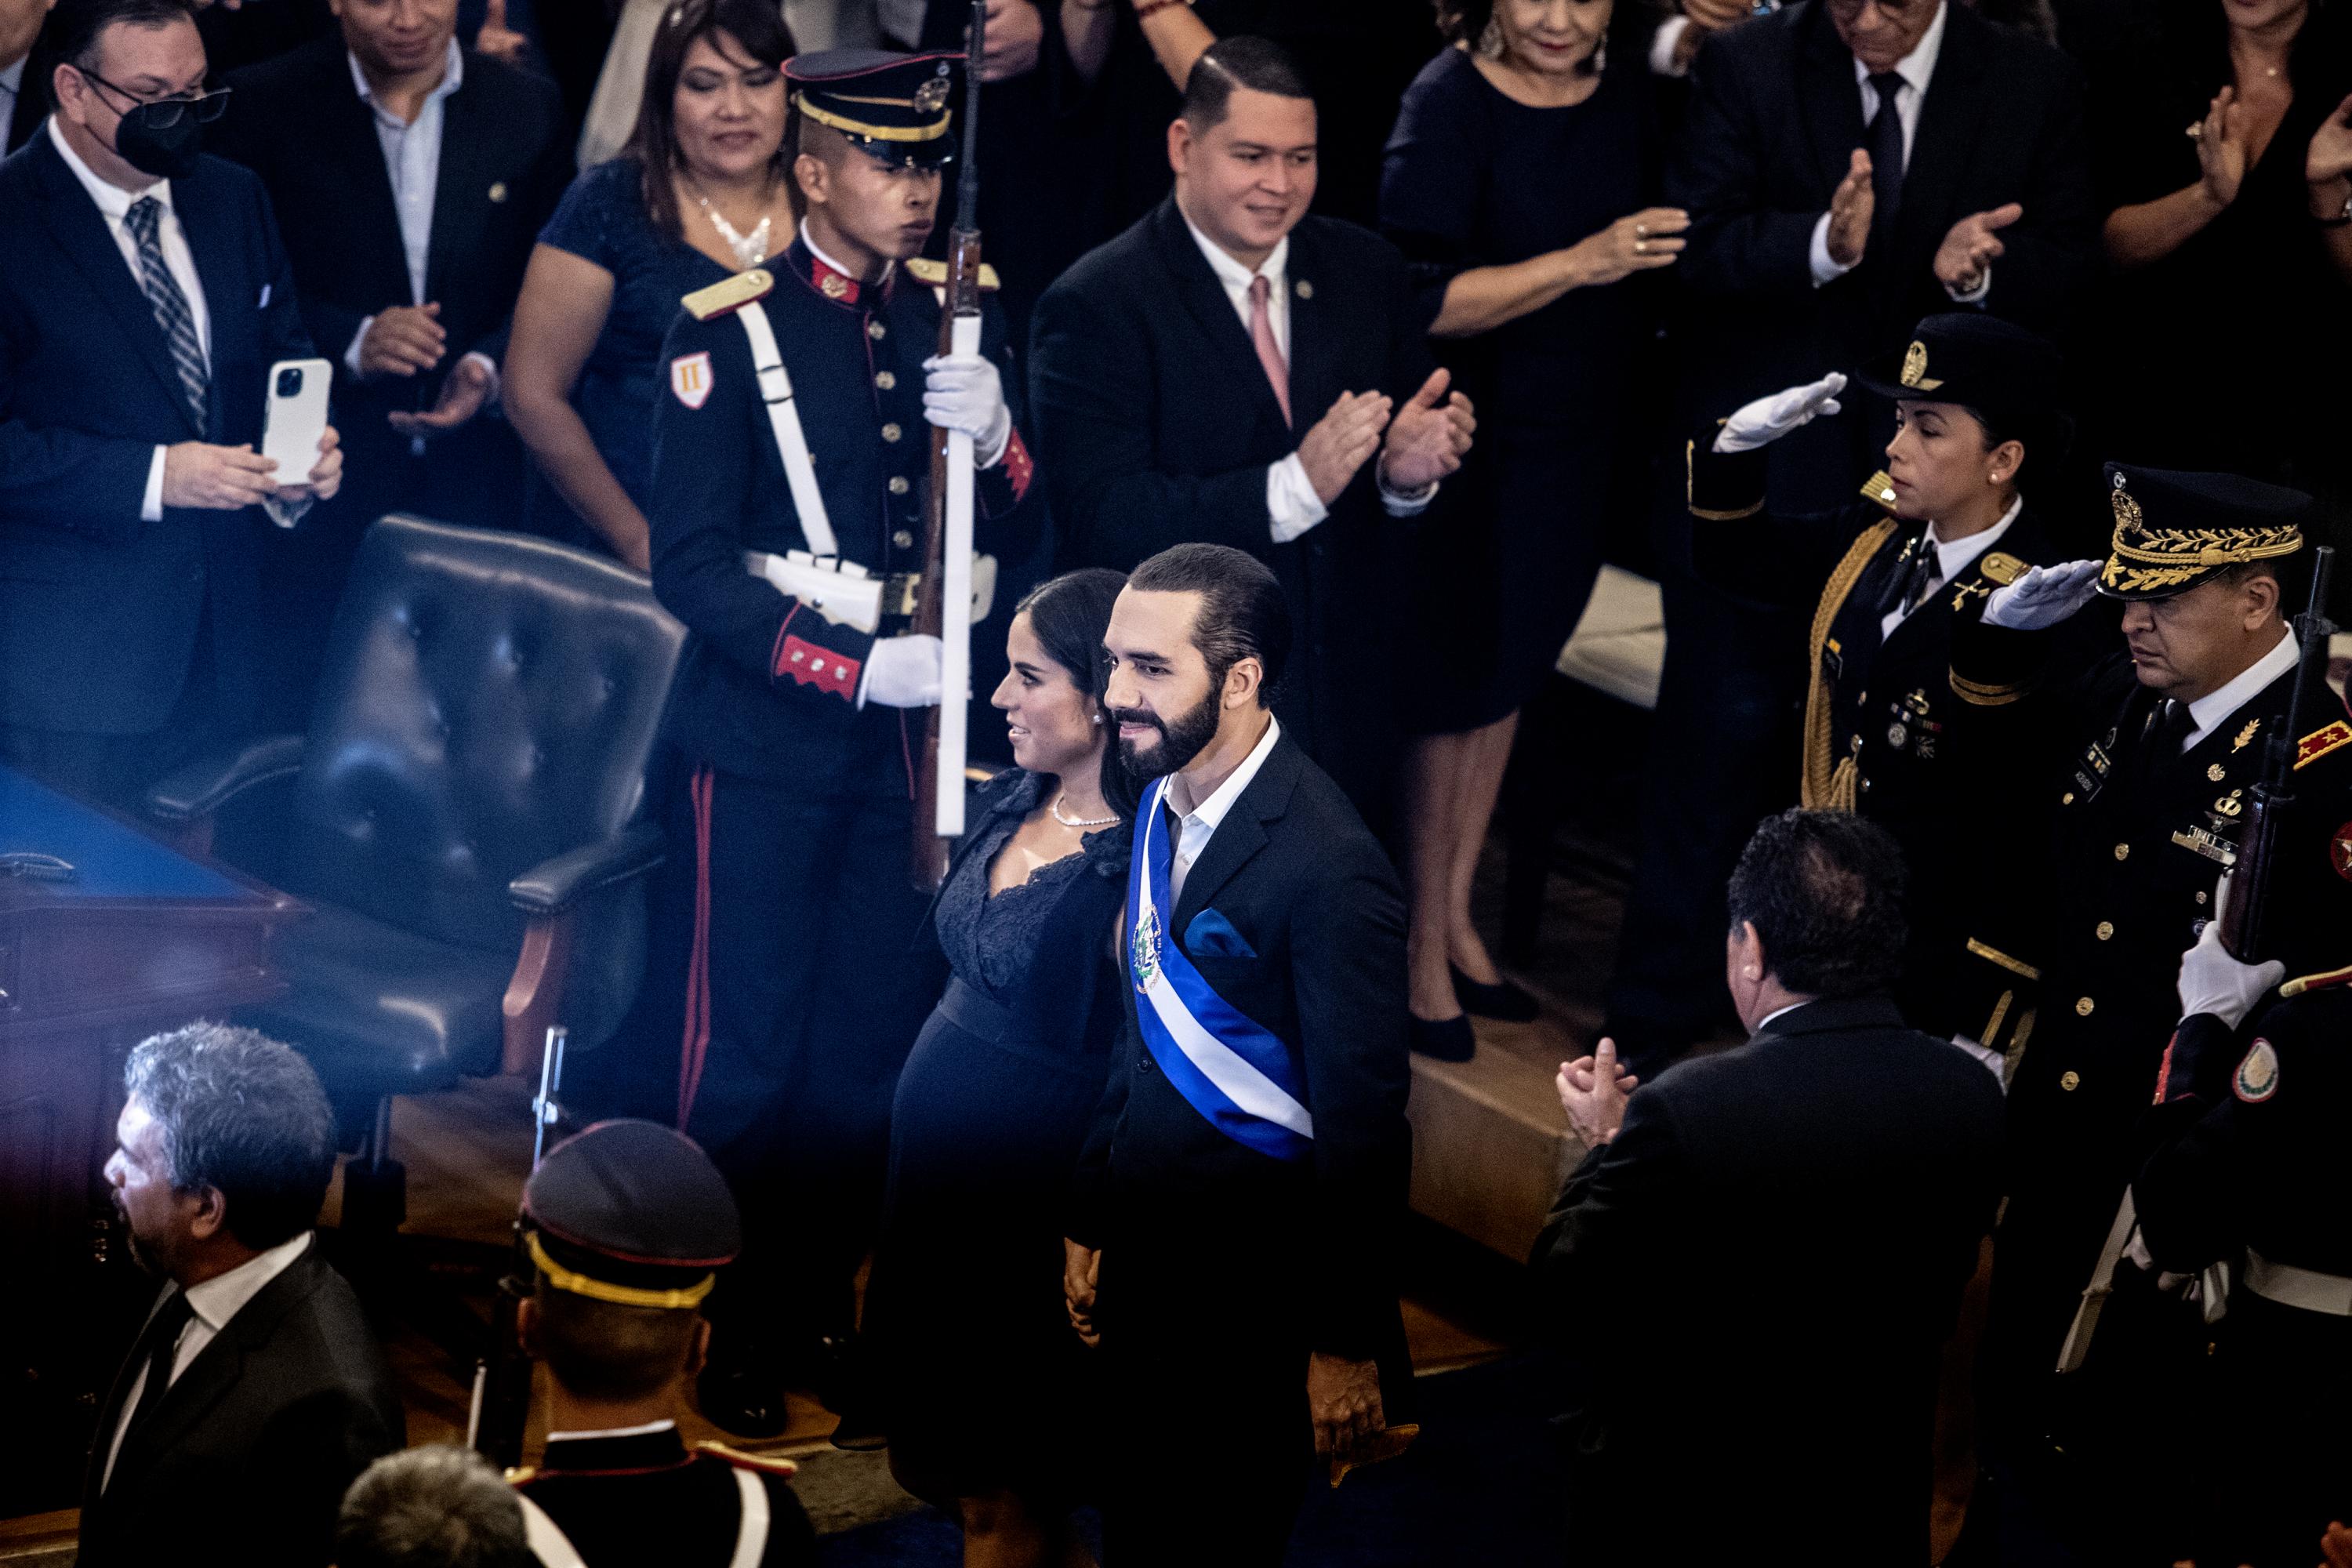 President Bukele enters the legislative chamber known as the Blue Room to give his fourth state of the nation address on June 1, 2023, alongside pregnant first lady Gabriela Rodríguez de Bukele. Photo Carlos Barrera